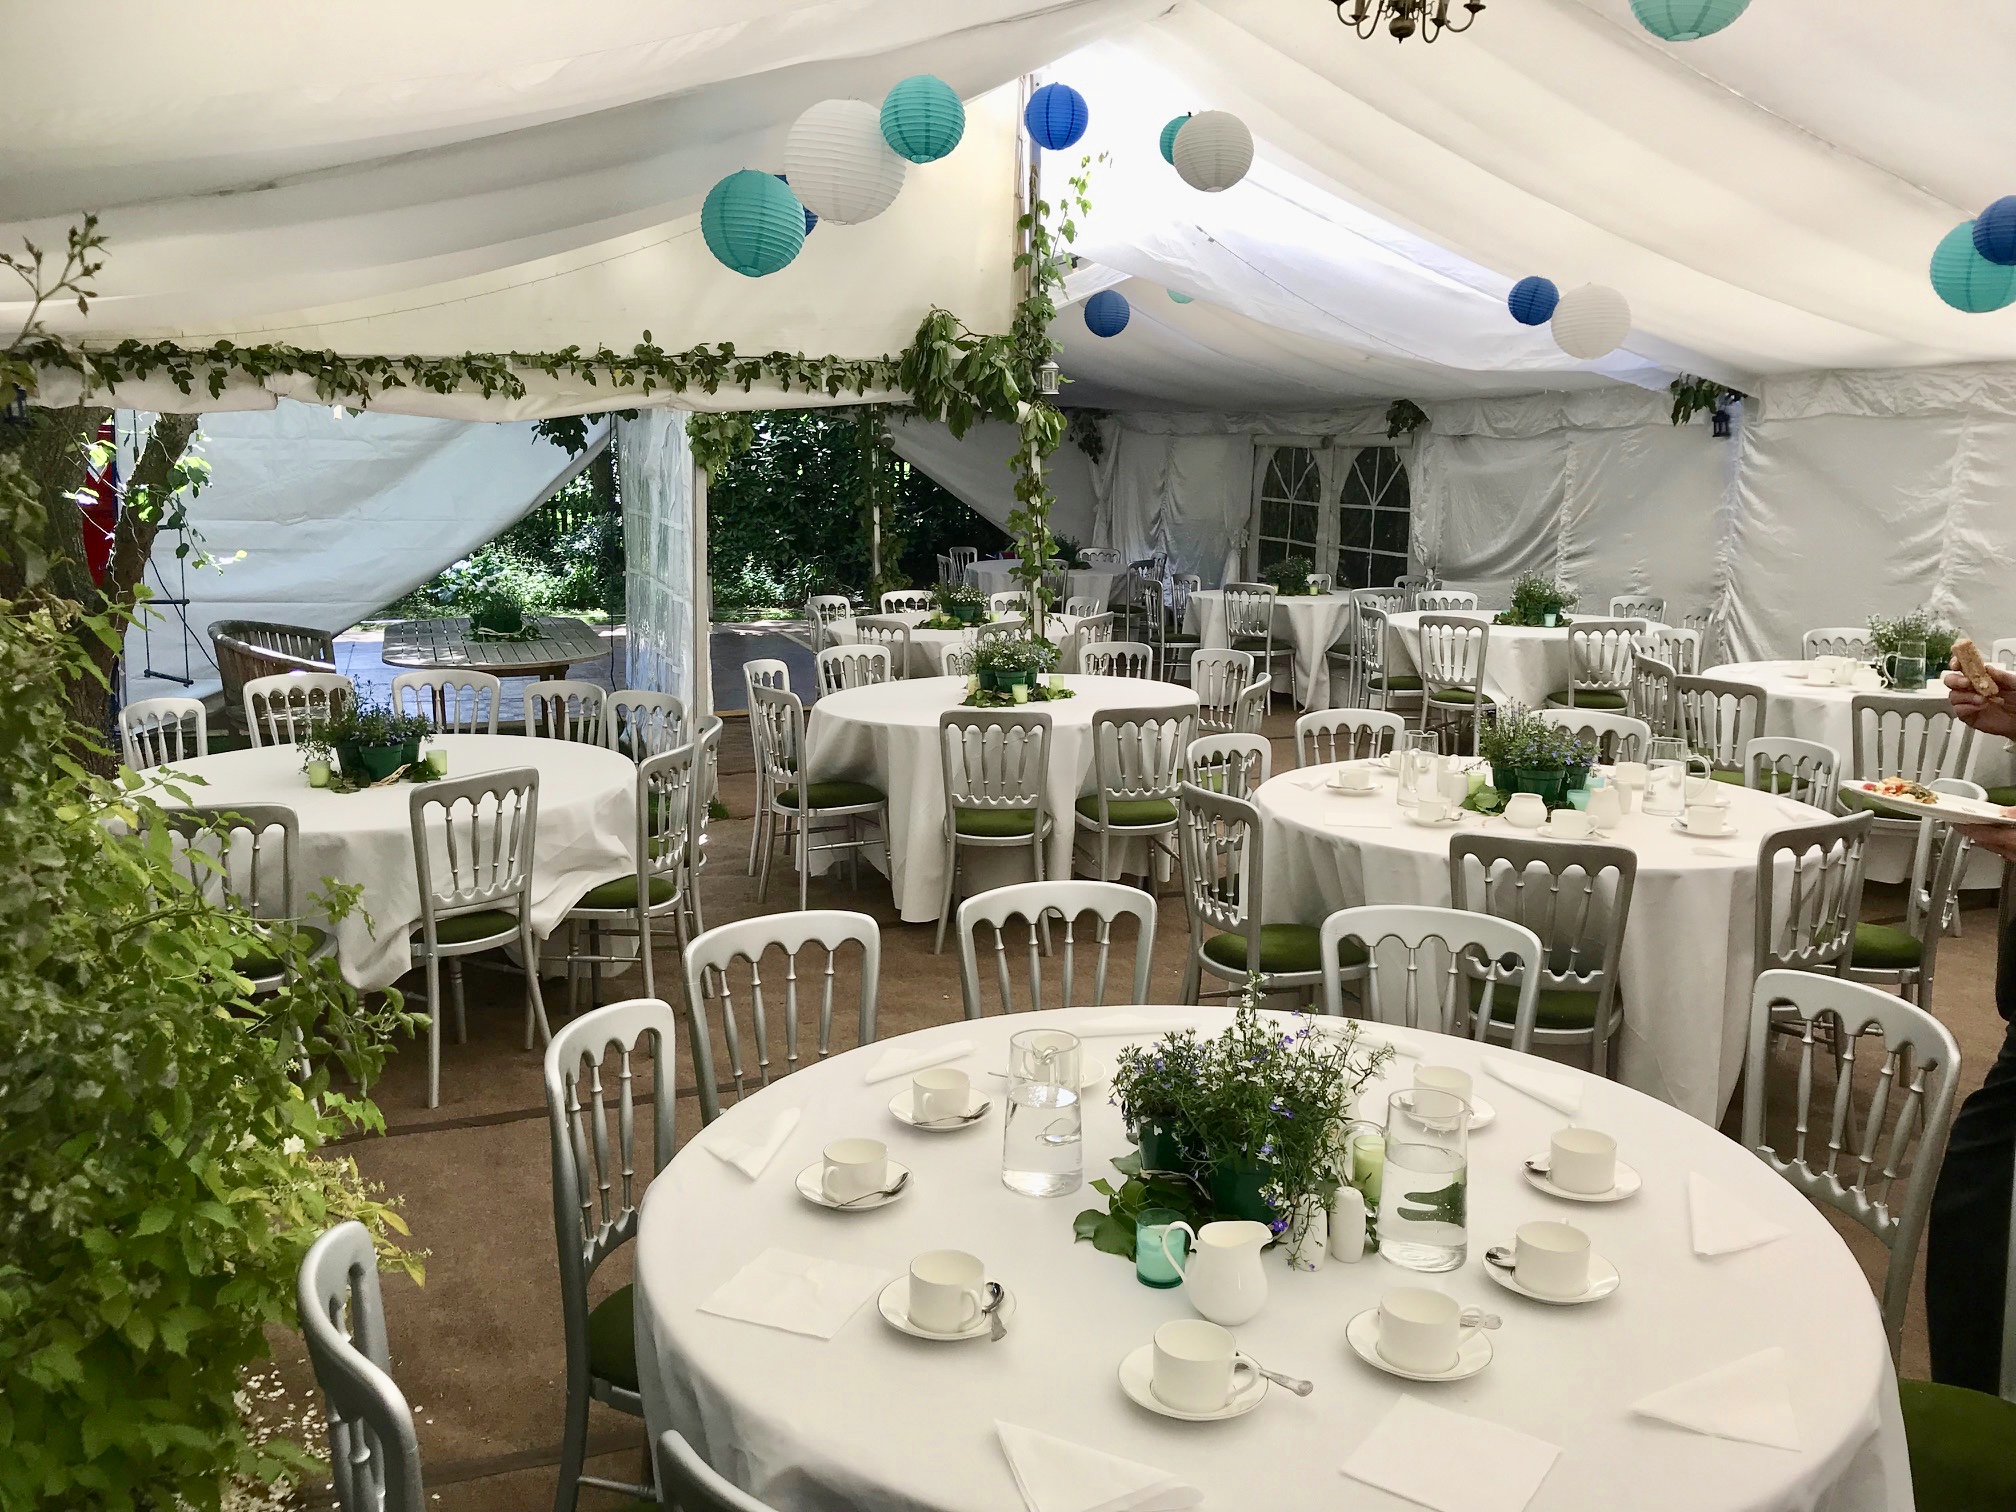 Flat vs Pleated. Choosing The Right Lining for Your Event